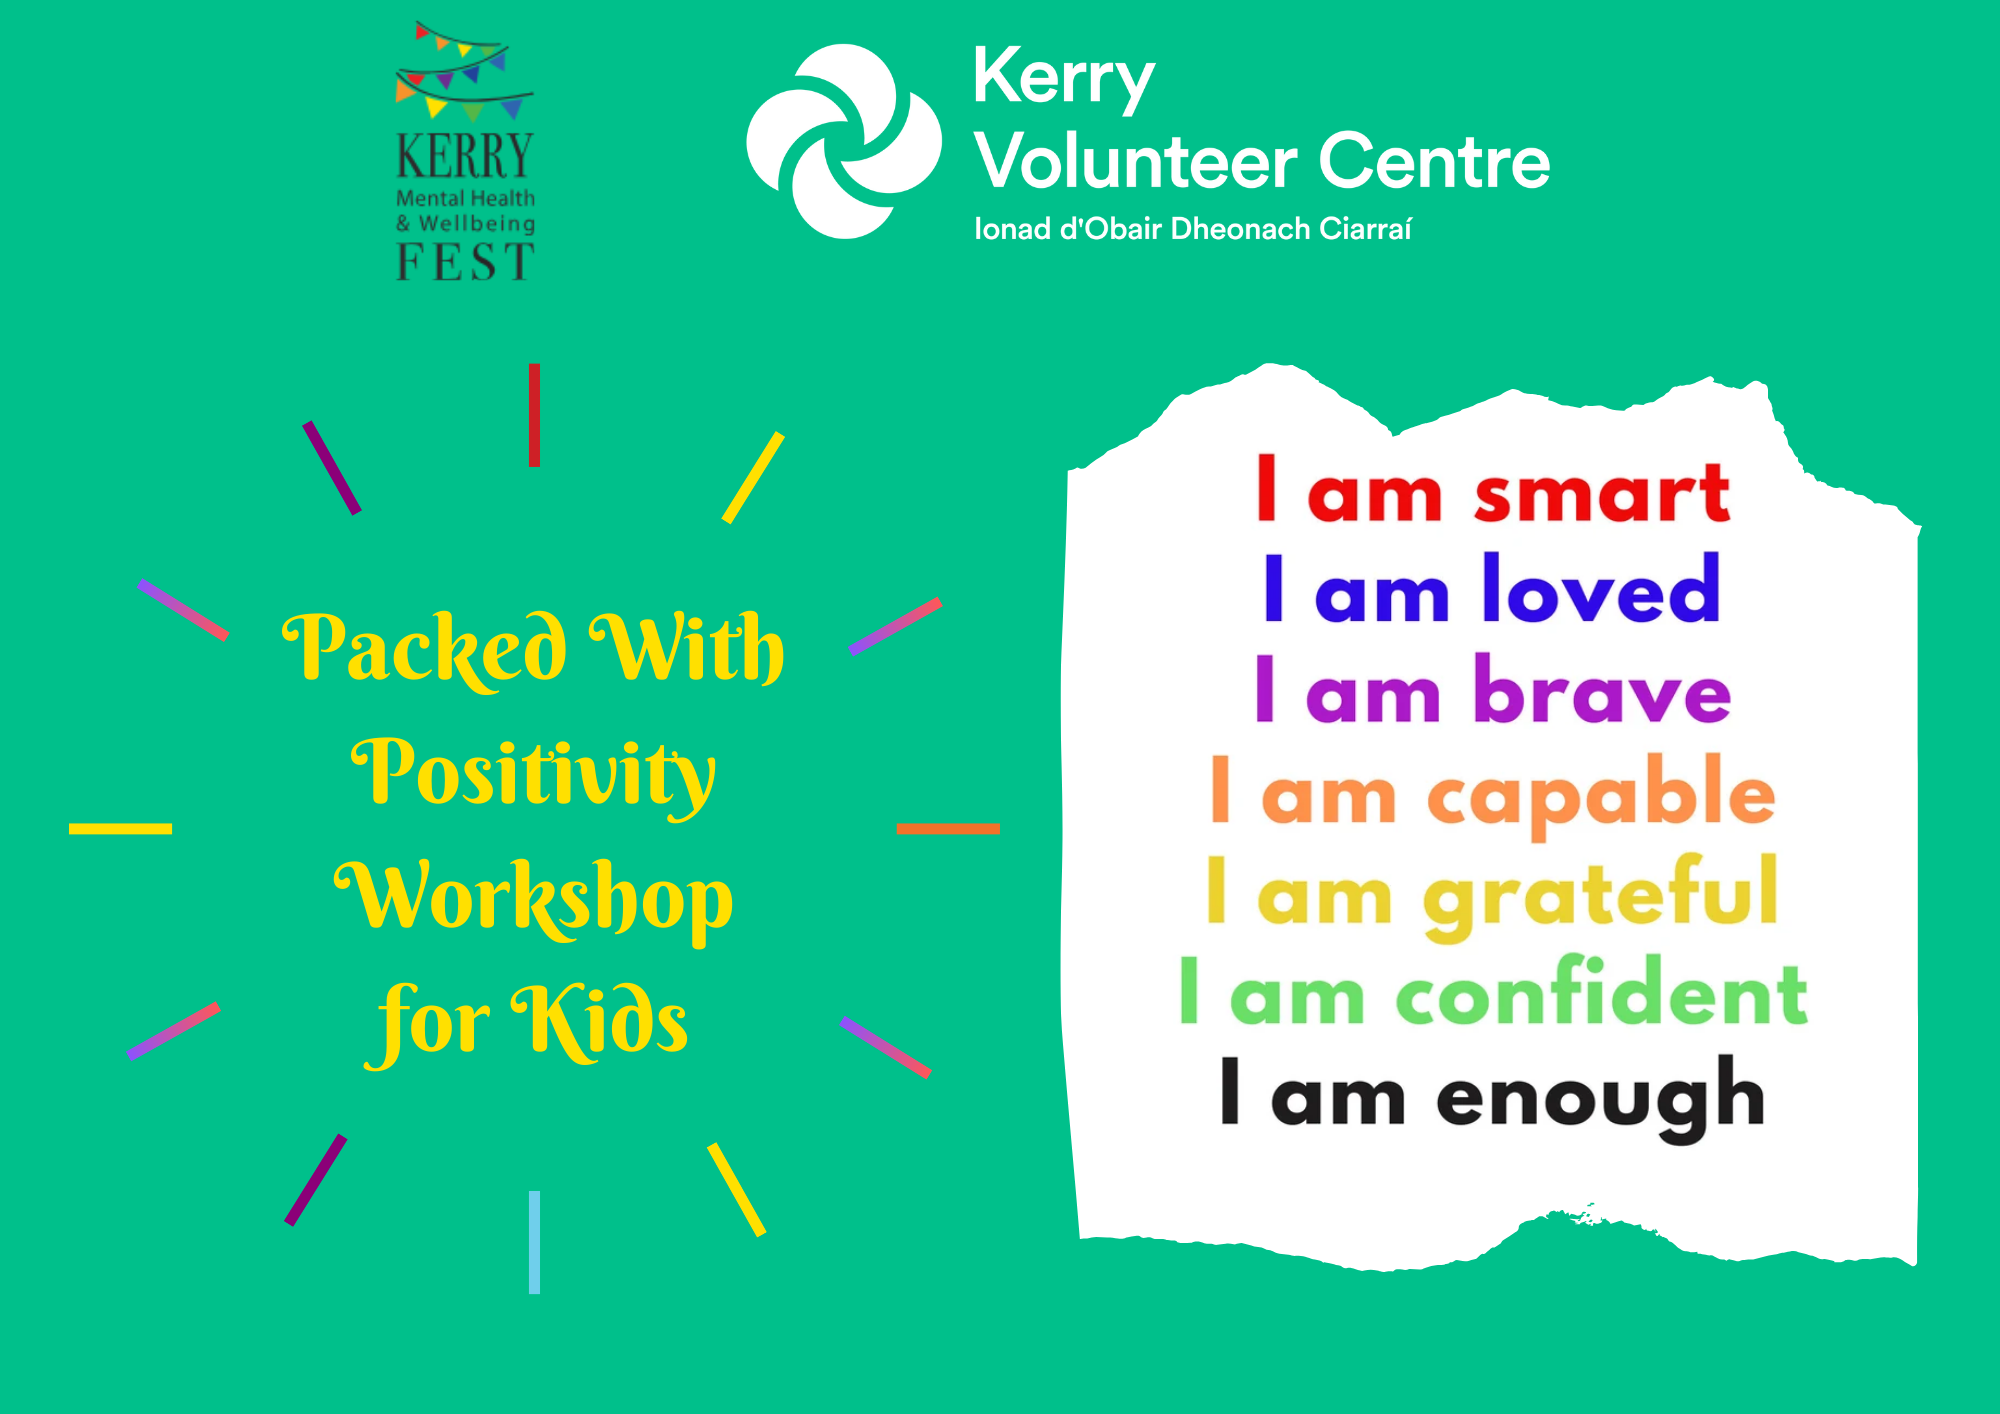 Packed With Positivity -8 to 12 year olds: 1pm to 3pm event at Kerry Mental Health & Wellbeing Fest 2022